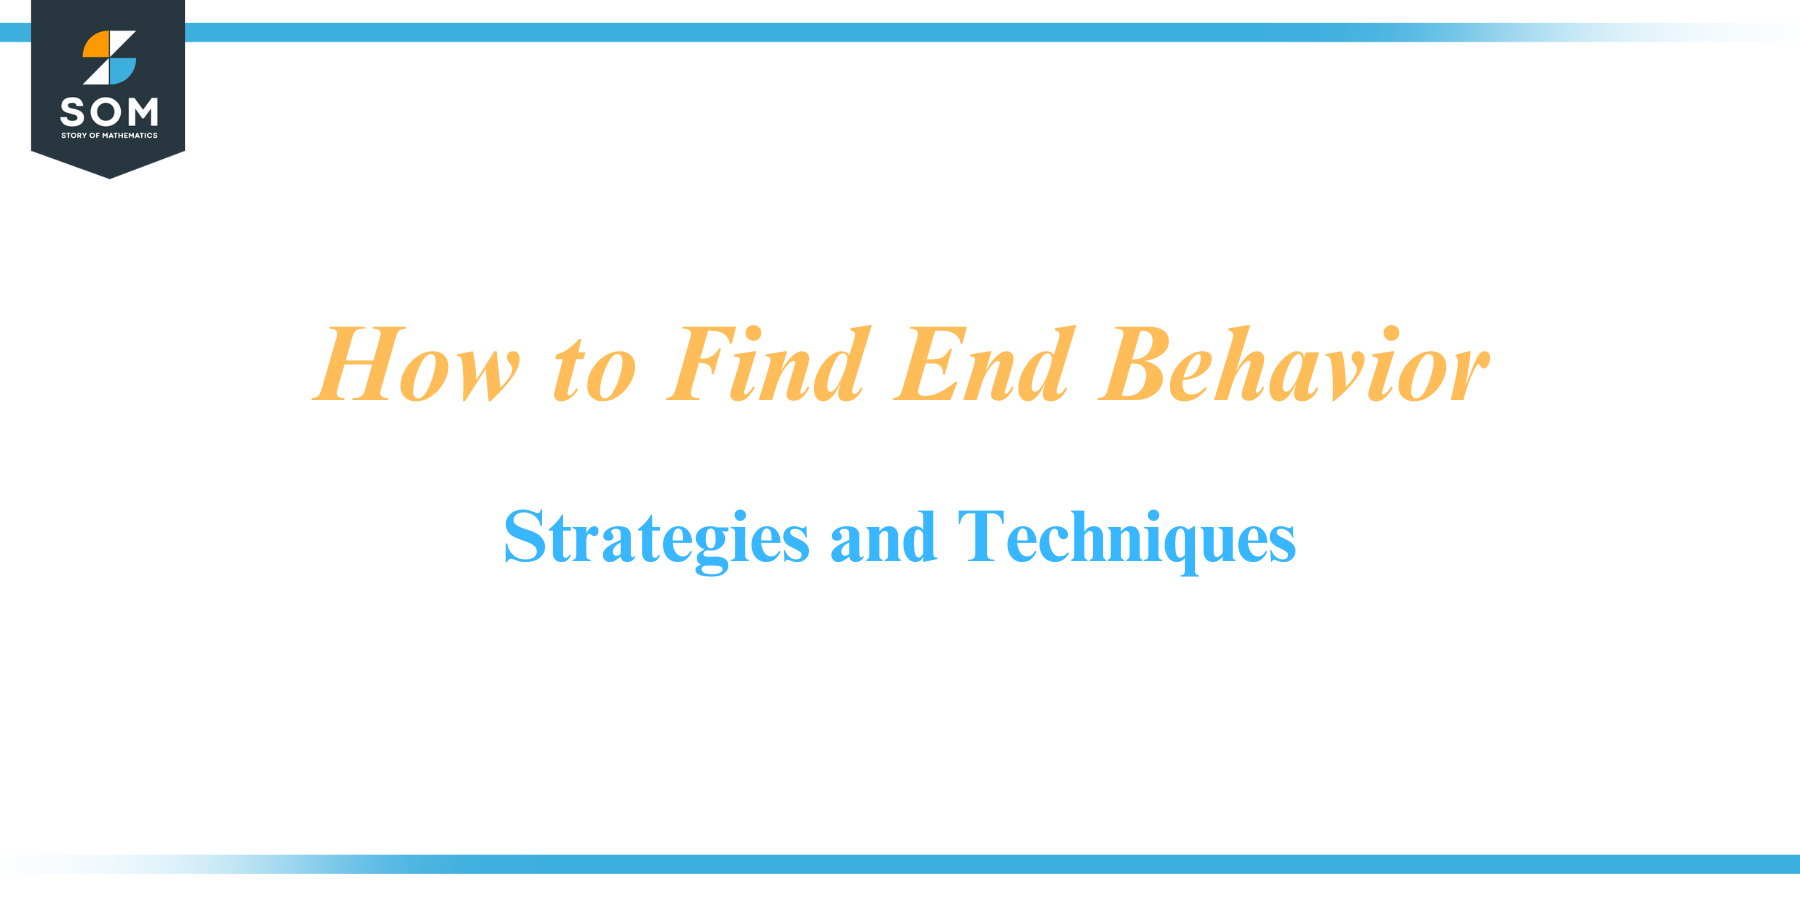 How to Find End Behavior Strategies and Techniques